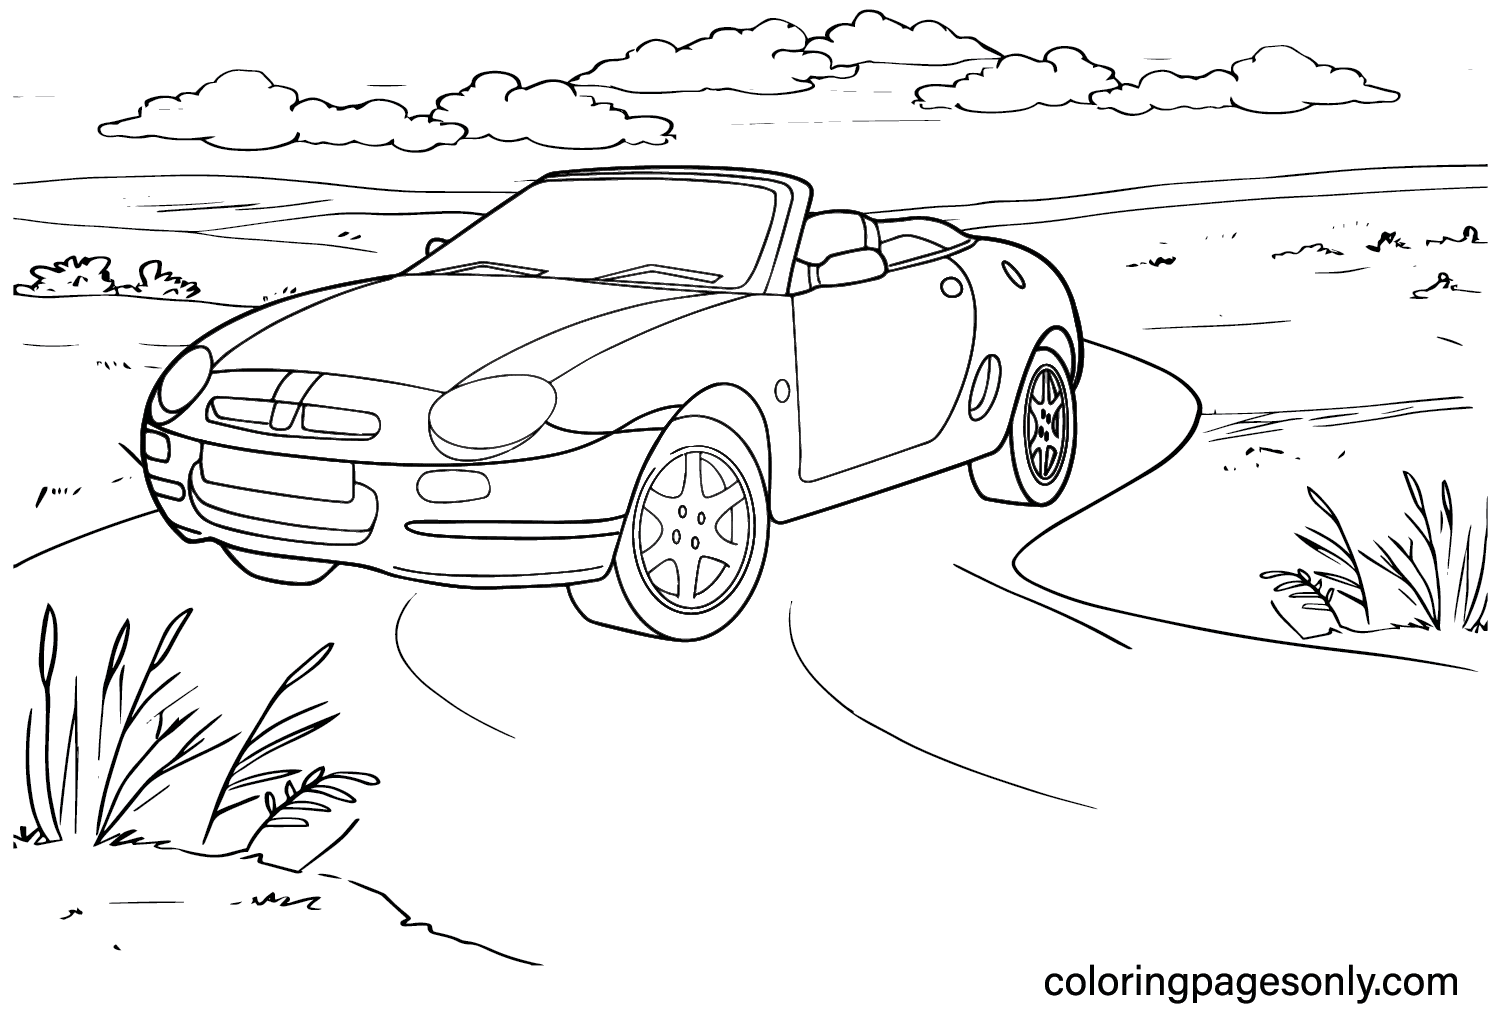 MG TF Community Forums Coloring Page